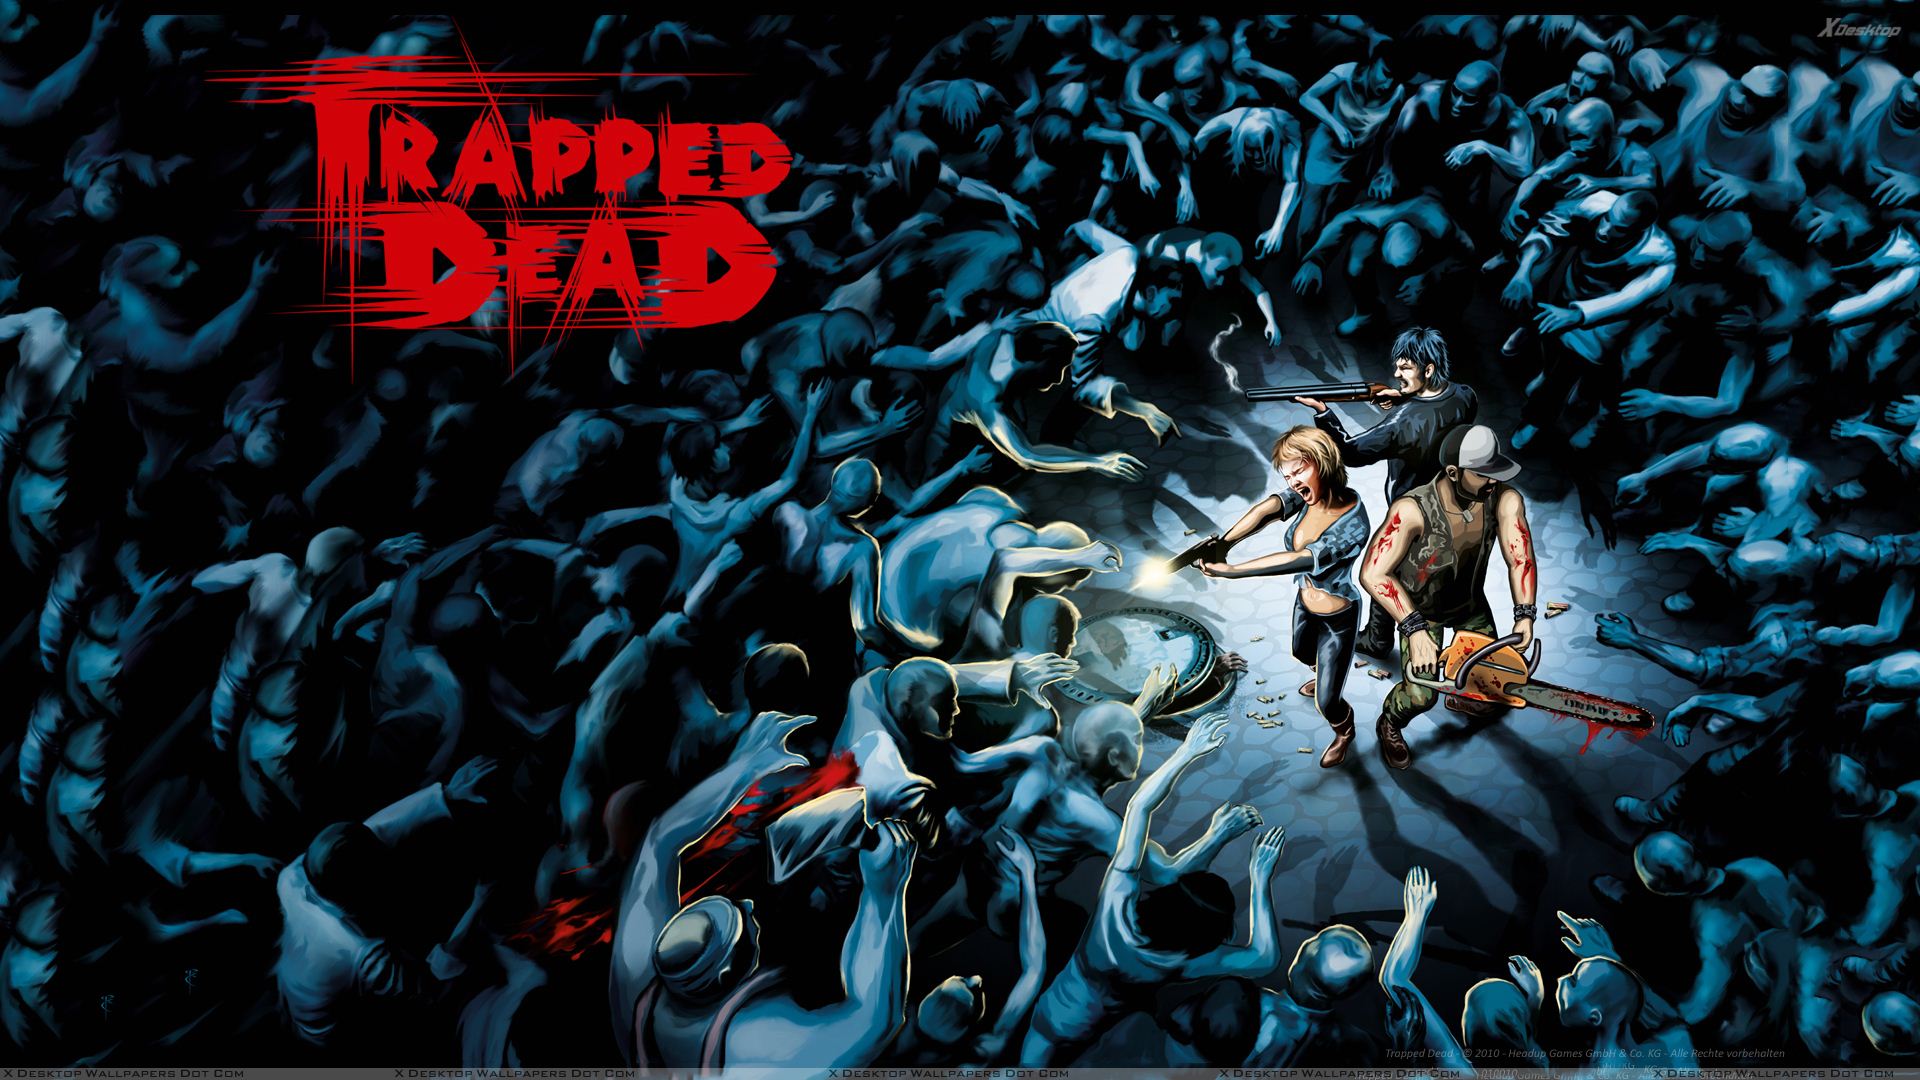 Surrounded By Lots Of Zombies – Trapped Dead Wallpaper